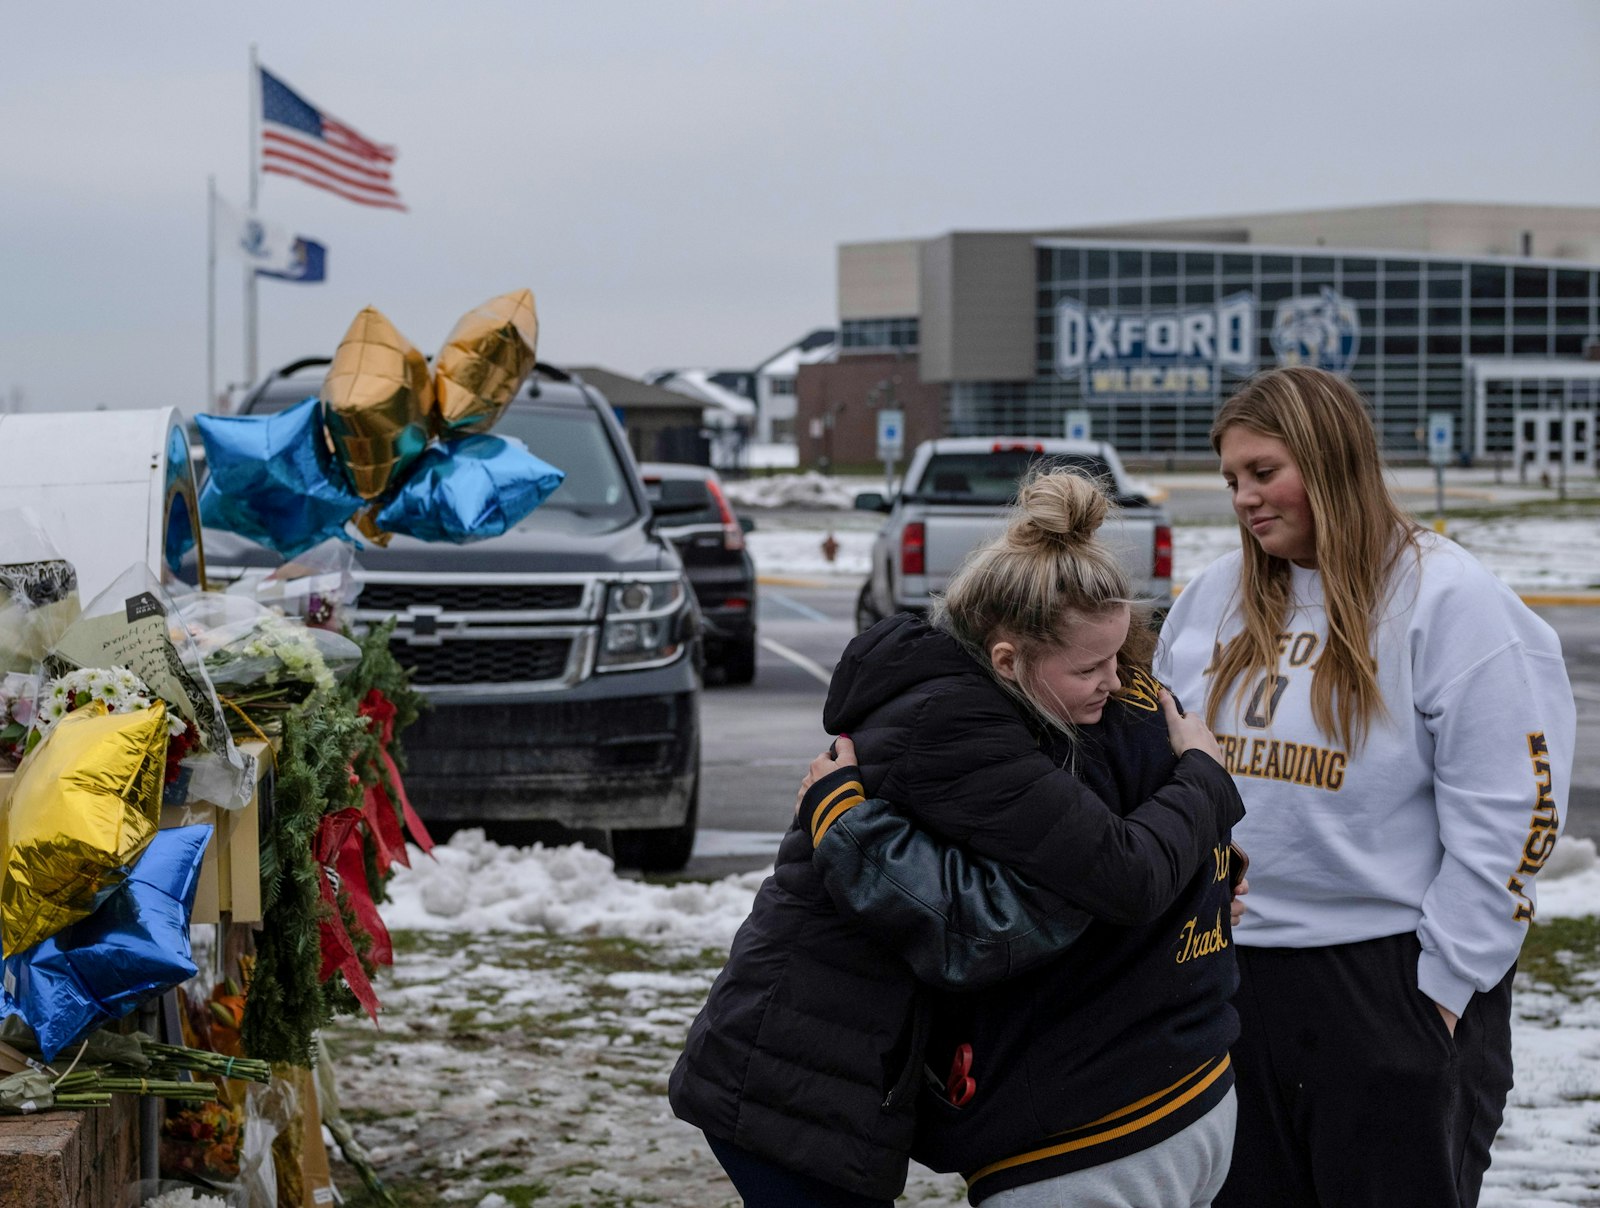 Oxford High School students embrace as they pay their respects at a memorial Dec. 1, 2021, a day after a mass shooting at the school. (CNS photo/Seth Herald, Reuters)